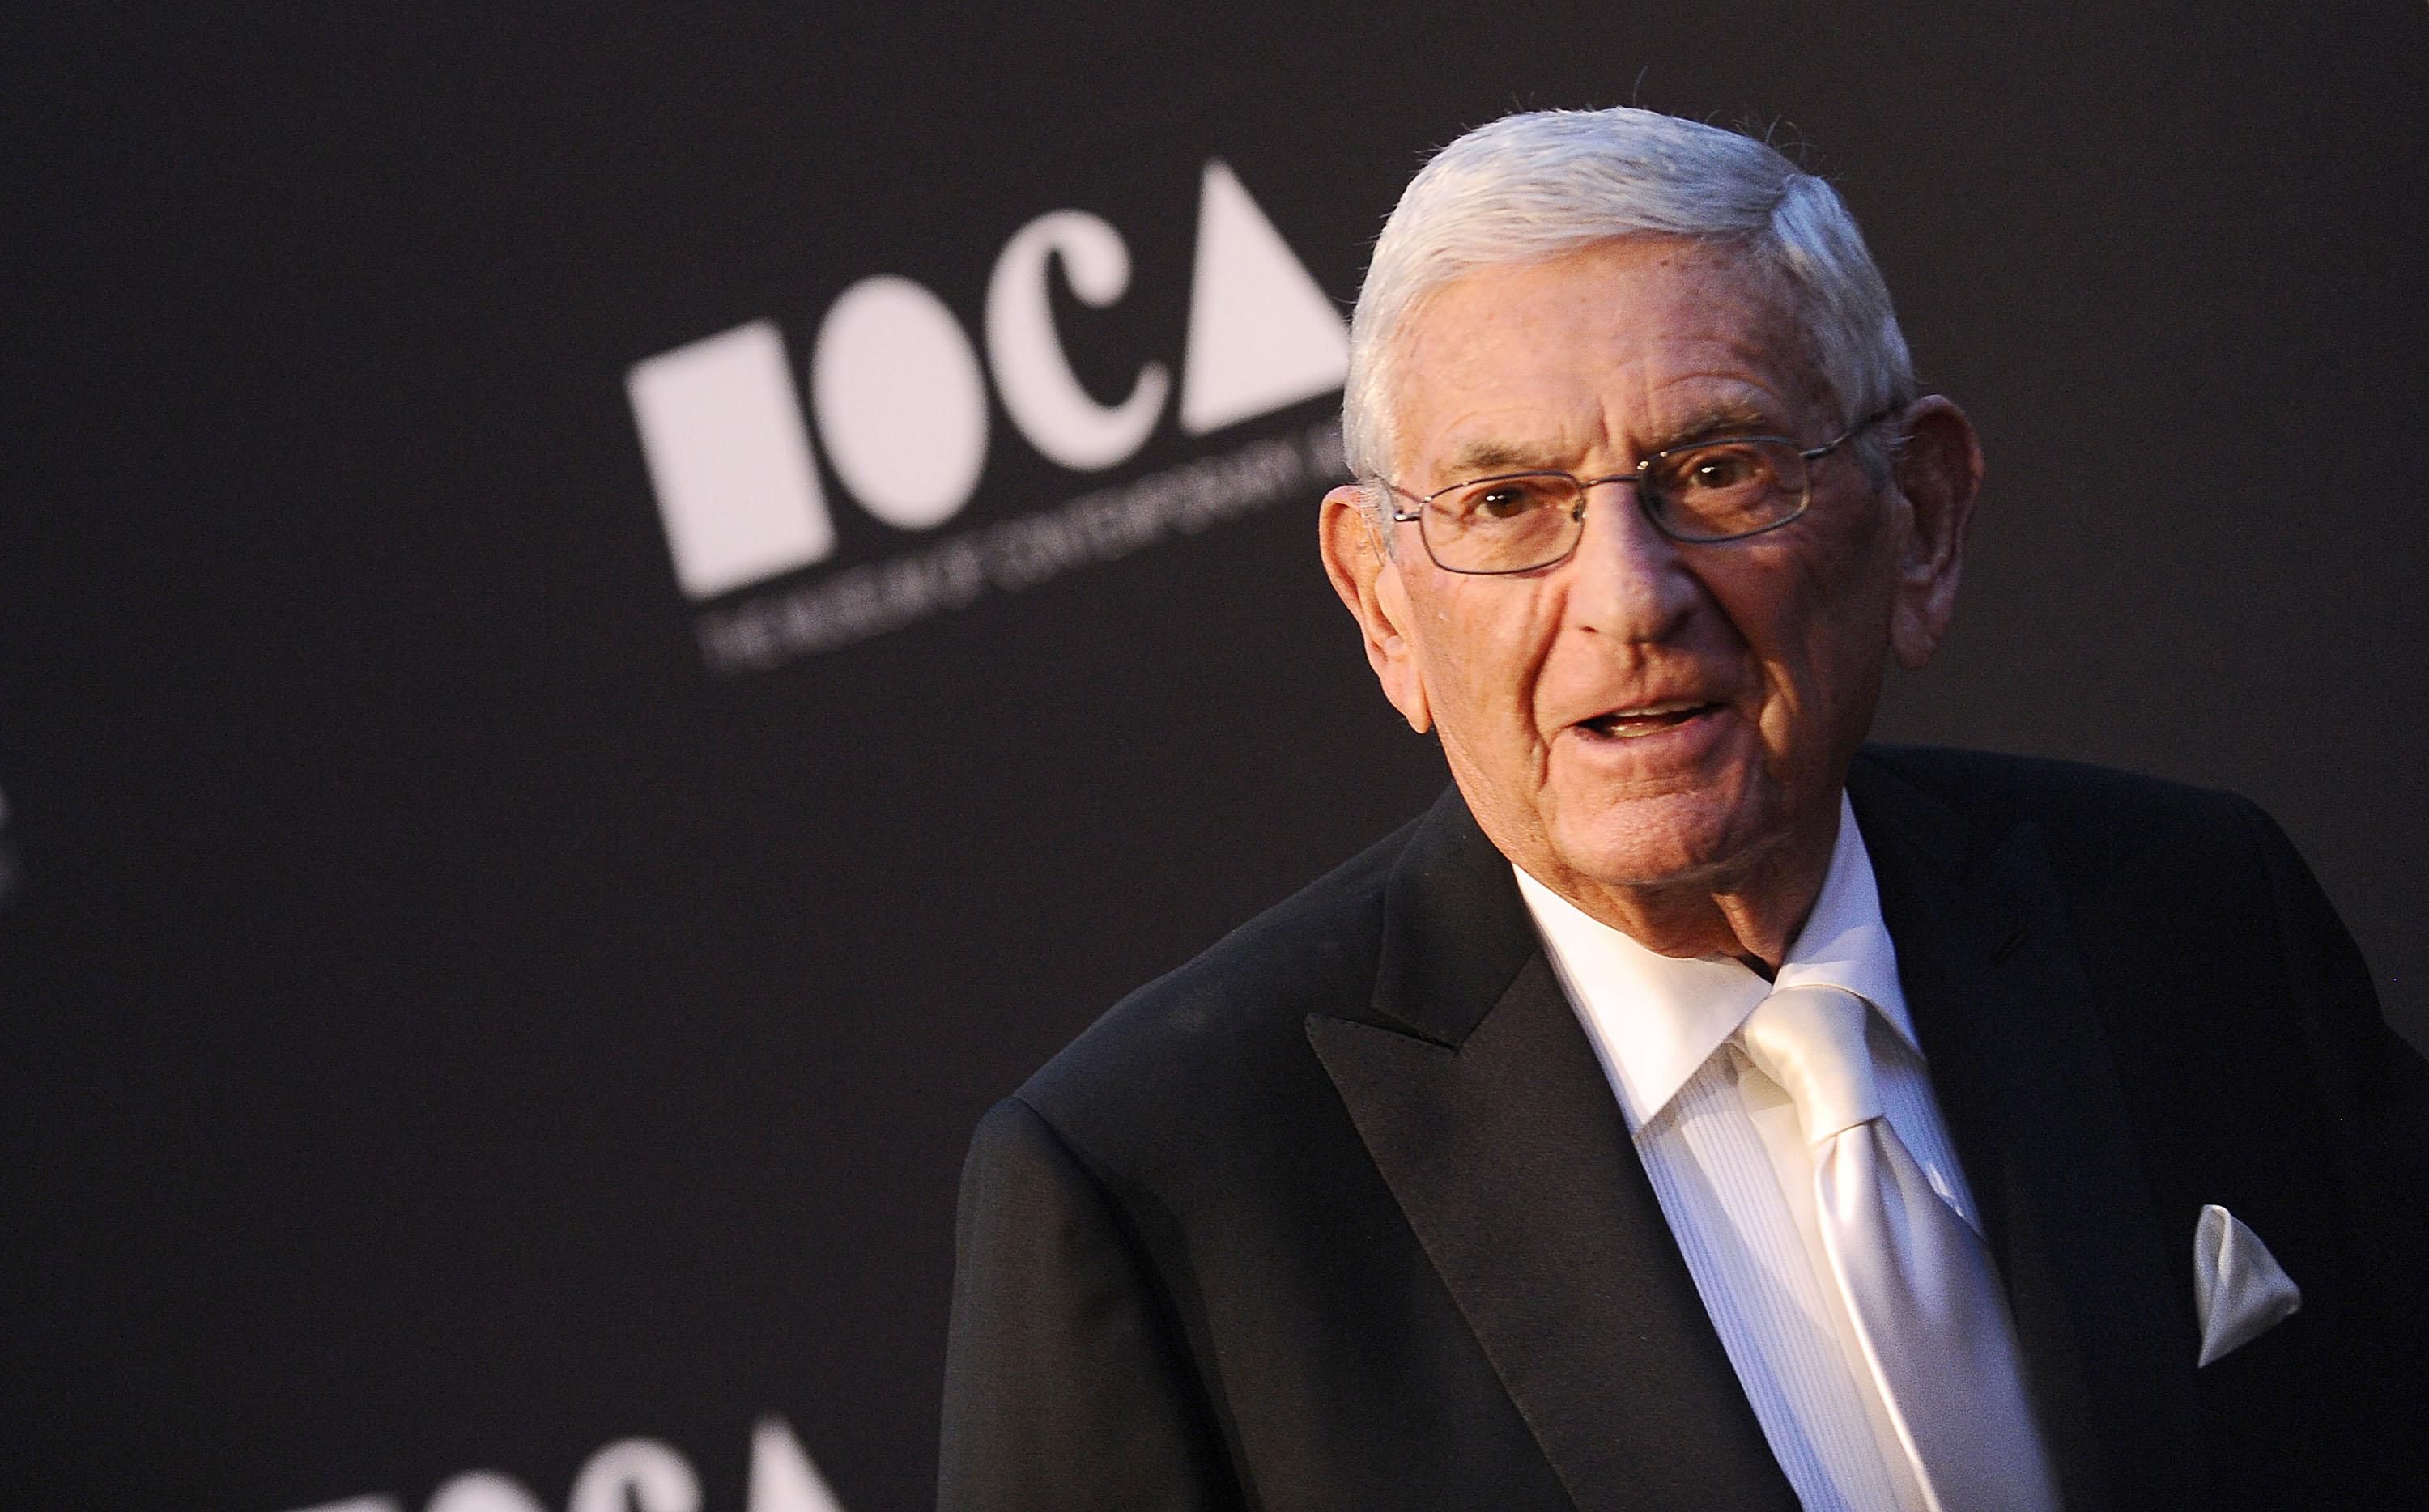 Broad’s investments in education reform were about redesigning schools "to function like corporate enterprises." (Photo: Eli Broad/Jason LaVeris/FilmMagic)